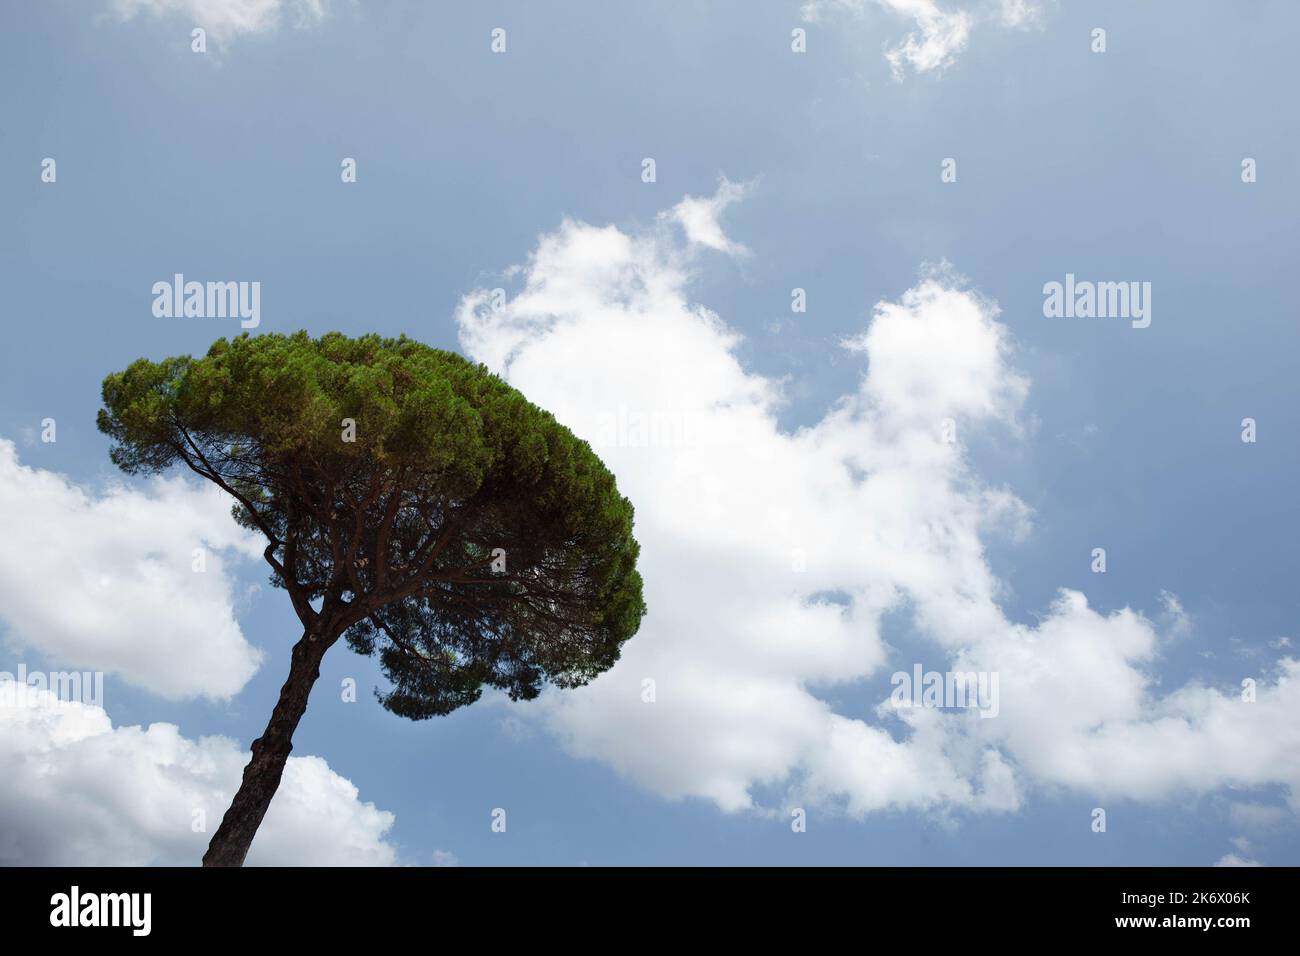 Pine tree and cloudy blue sky on background Stock Photo